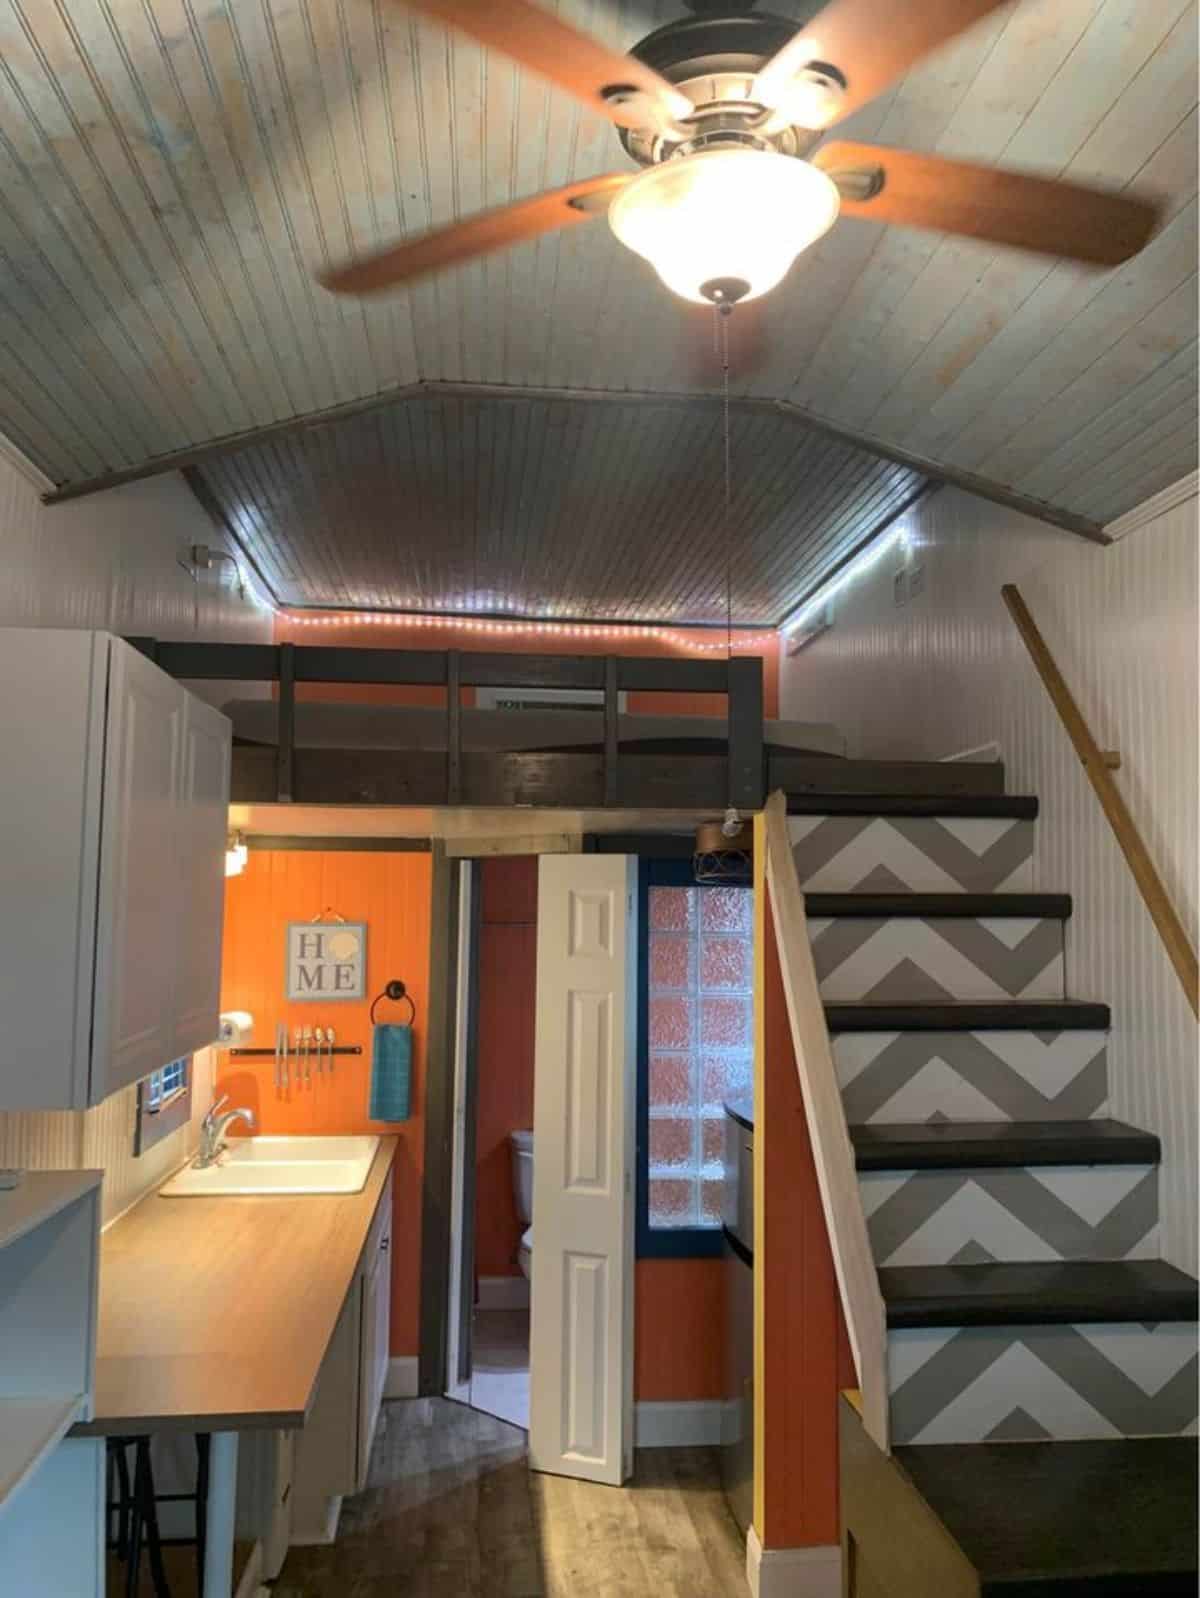 Huge fan in the living area of 400 sf tiny home